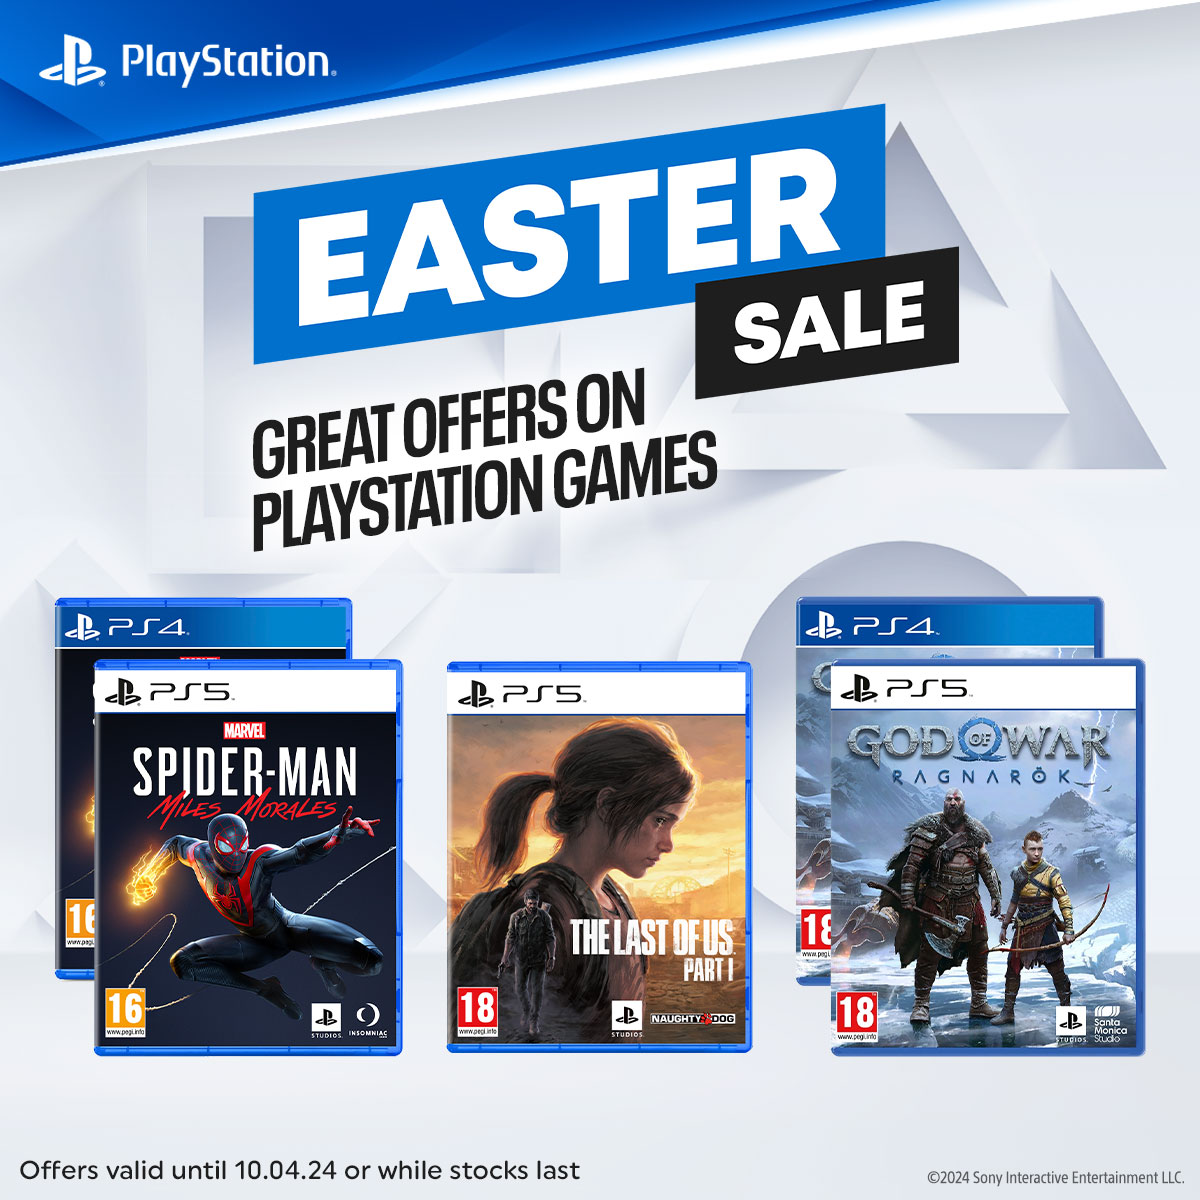 Find Great Offers on PlayStation Games at Smyths Toys! 🎮 Shop the full range here 👉 tinyurl.com/3c79mt2x